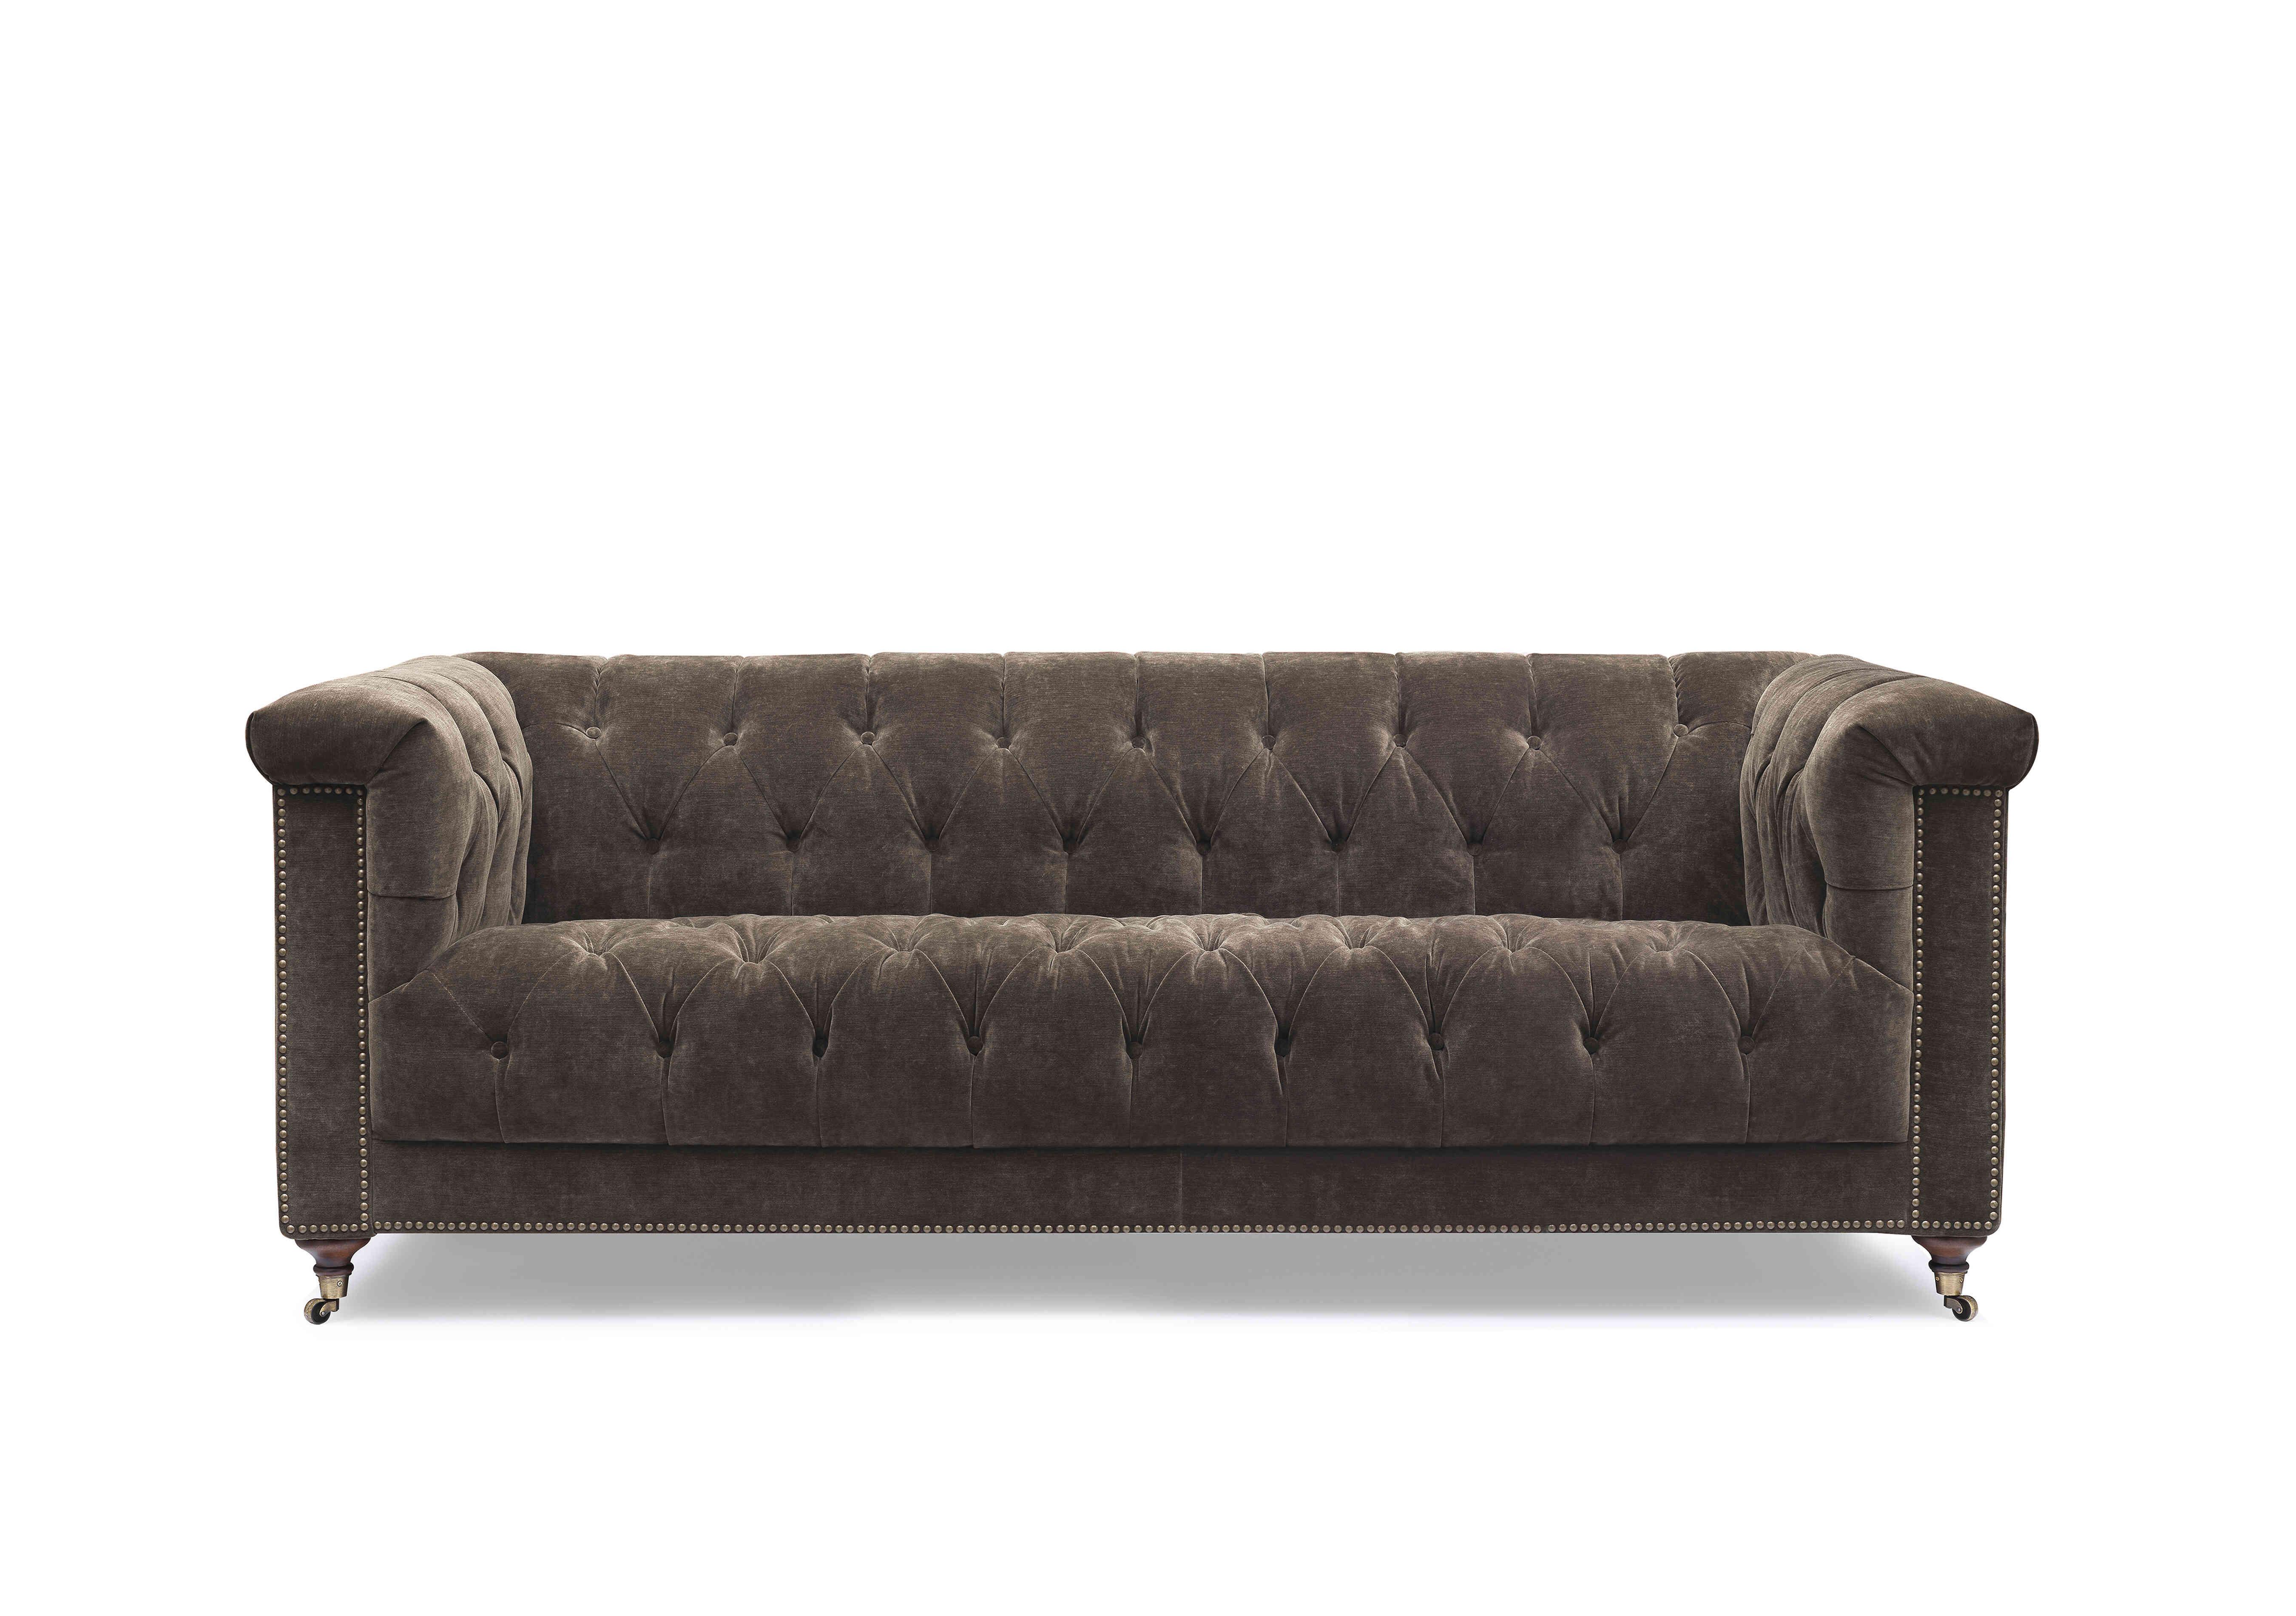 Wallace 3 Seater Fabric Chesterfield Sofa with USB-C in X3y1-W020 Brindle on Furniture Village